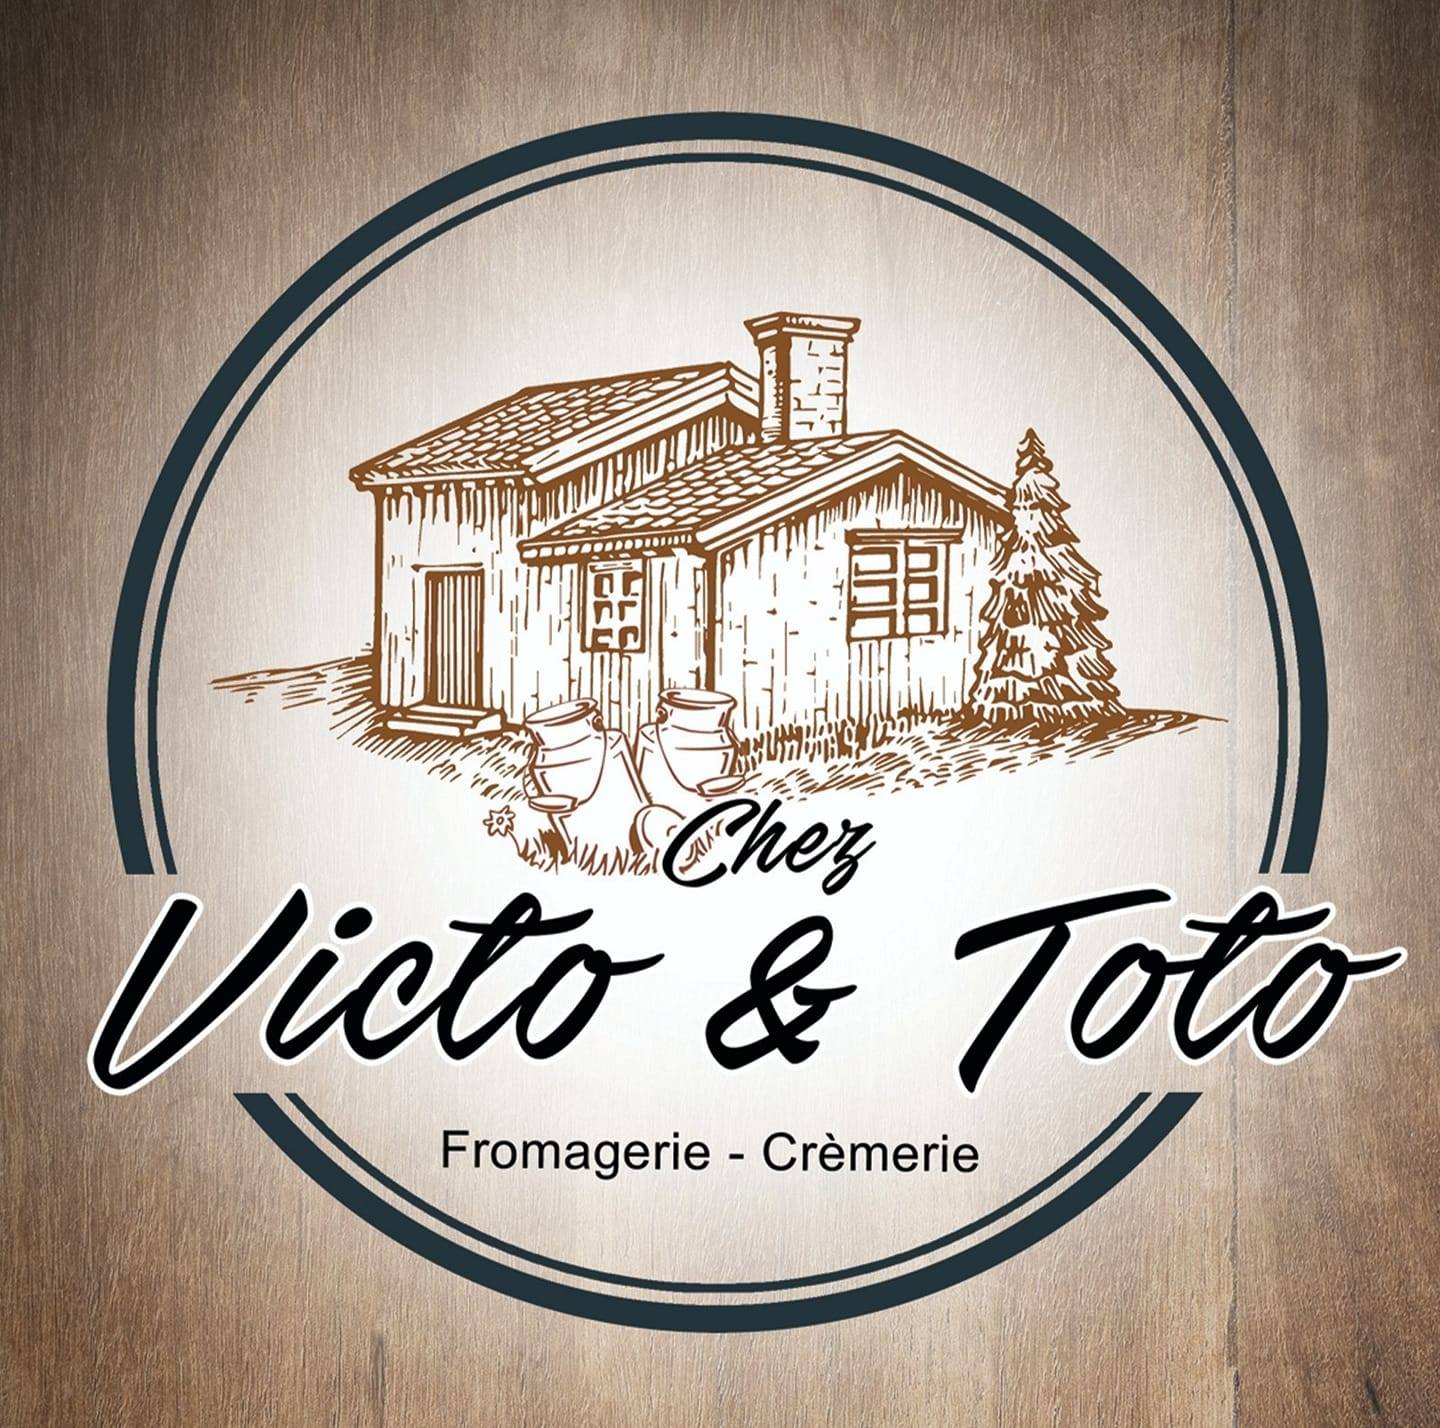 Nos Fromages Fromagerie Chez Victo Et Toto 